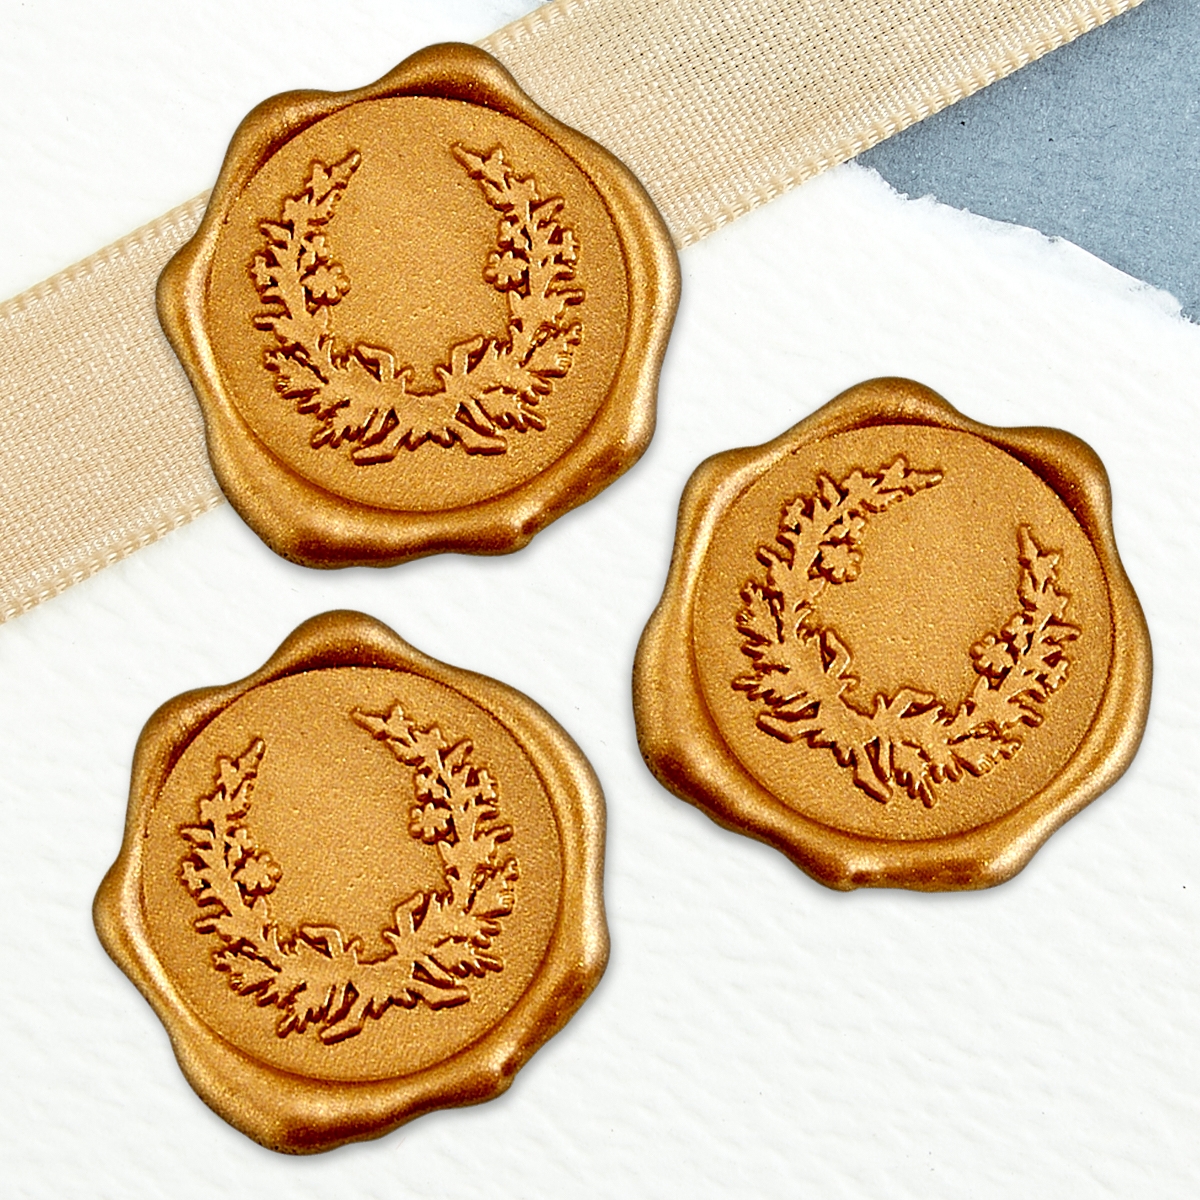 Quick-Ship Ready Made Stock Wax Seals - ready to use with a strong